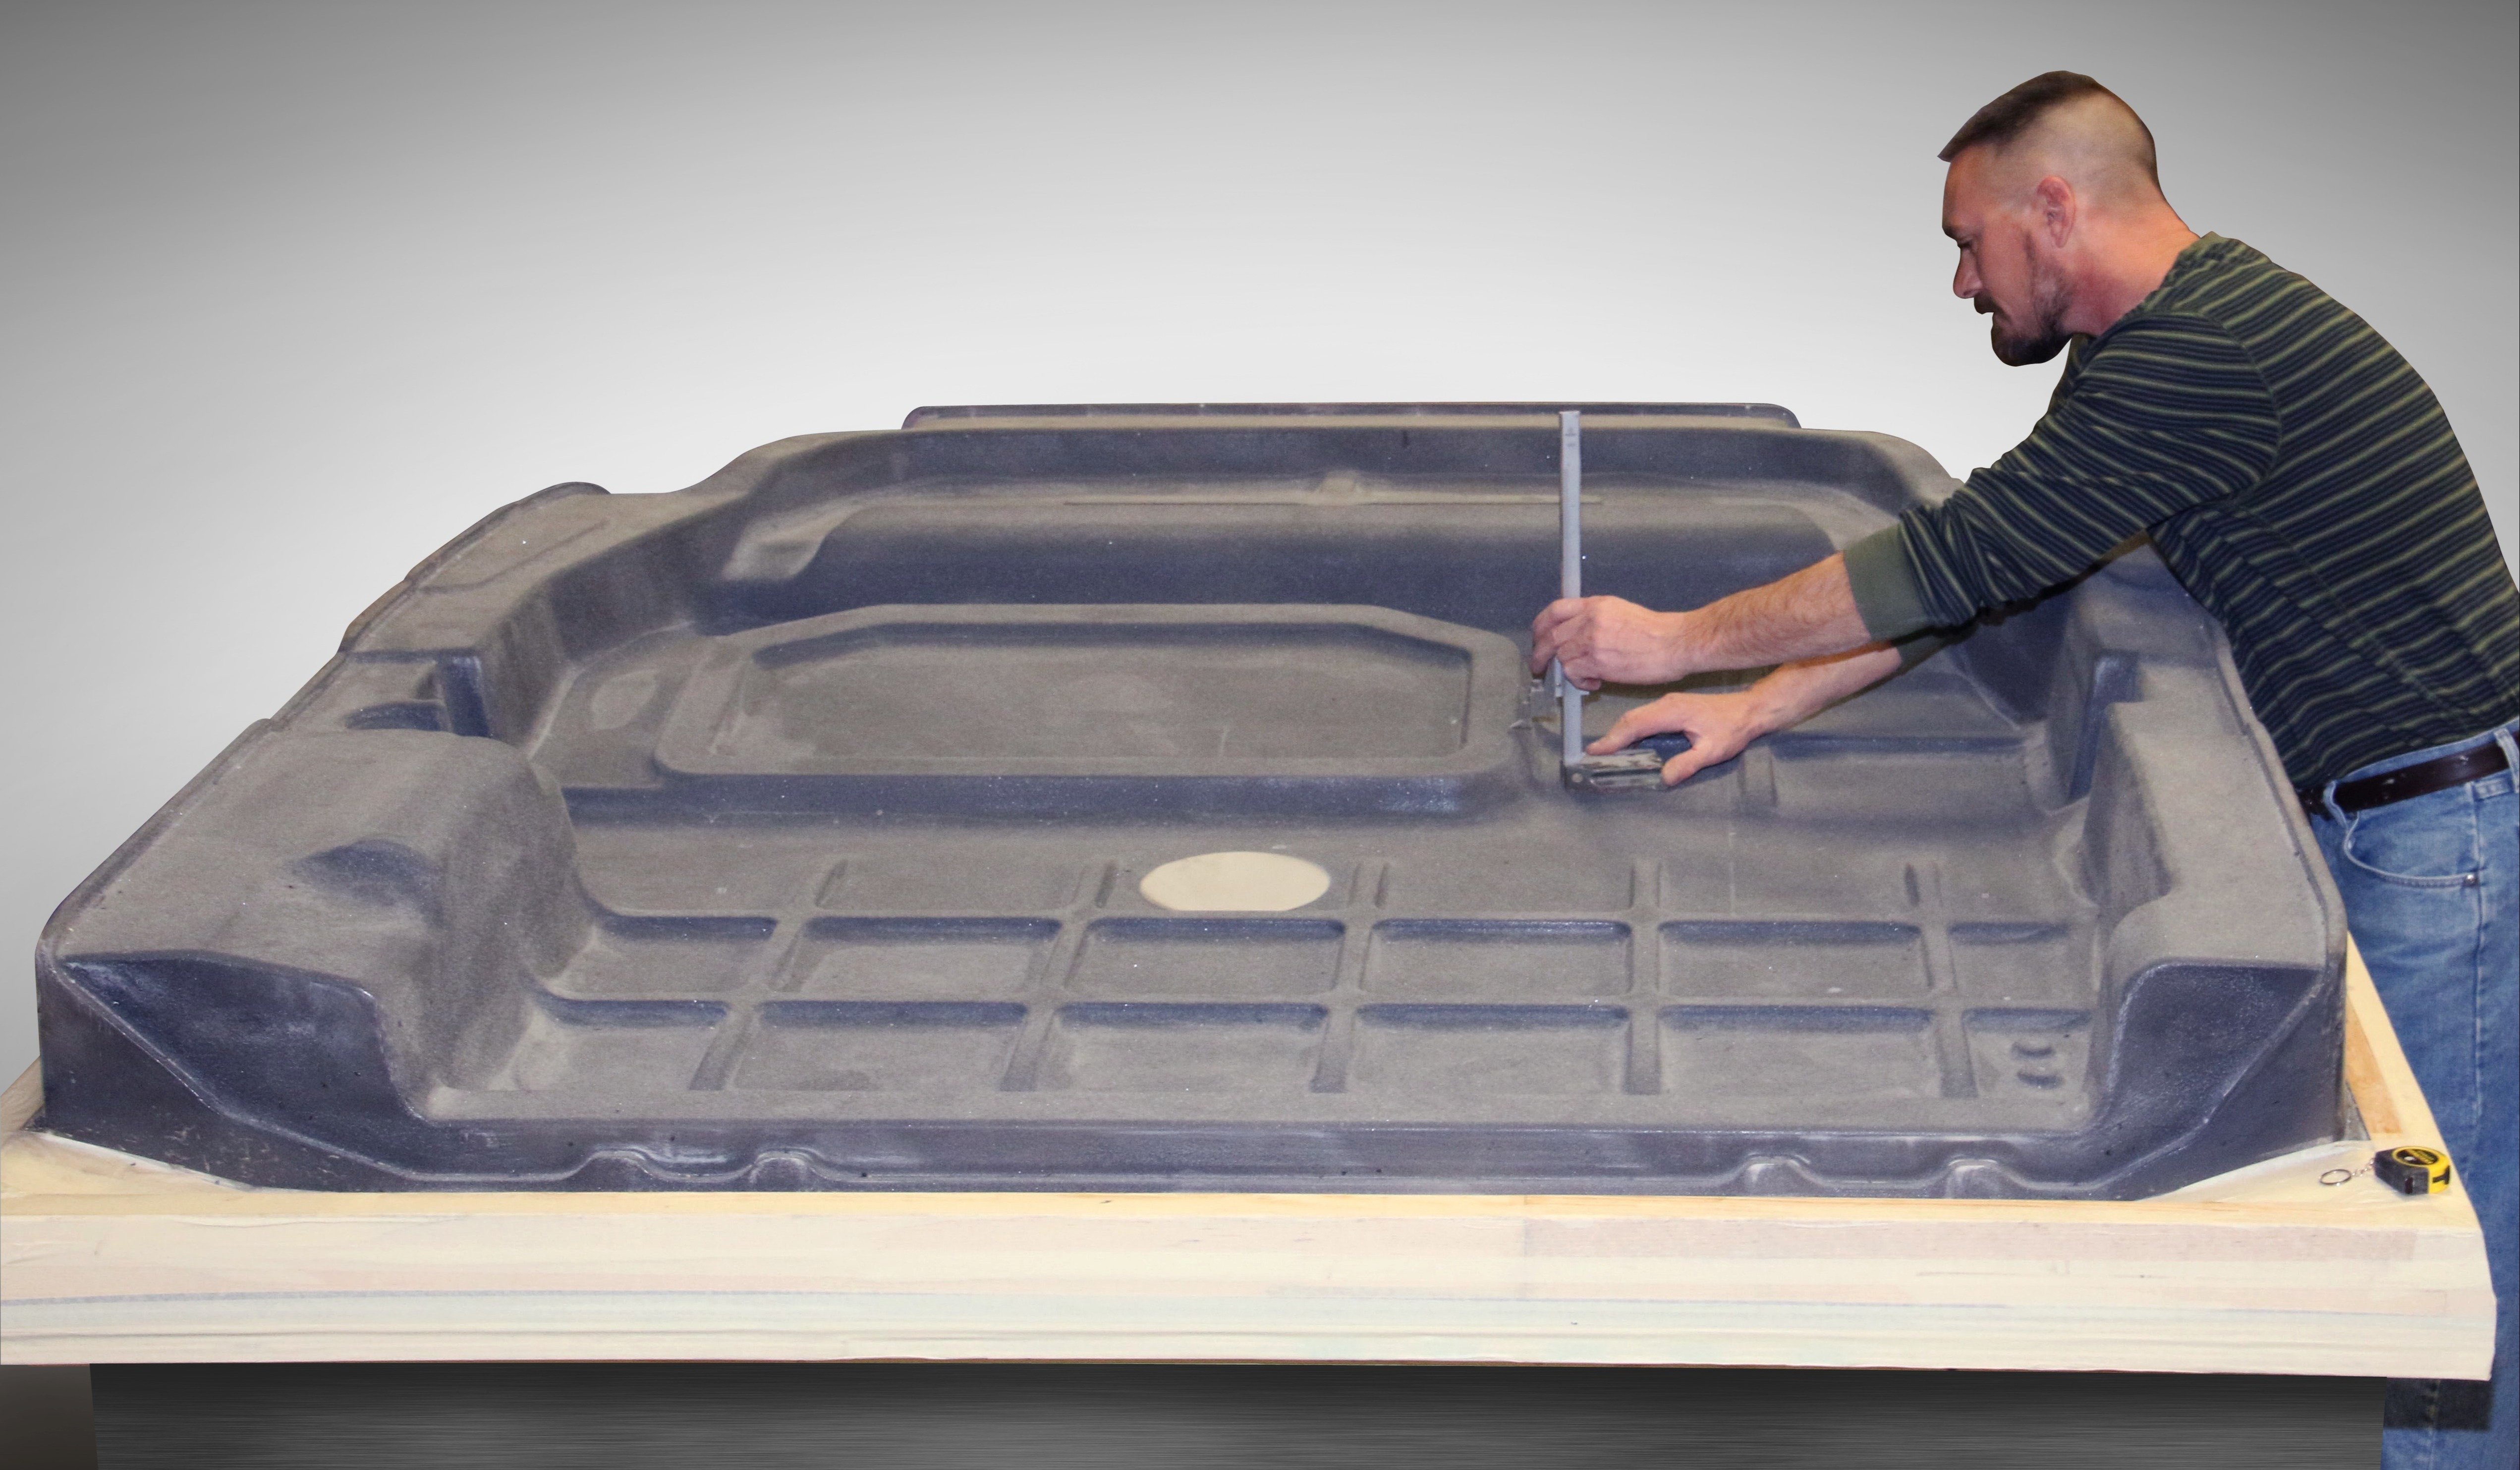 Thermoforming Applications: What Jobs are Ideal Candidates?